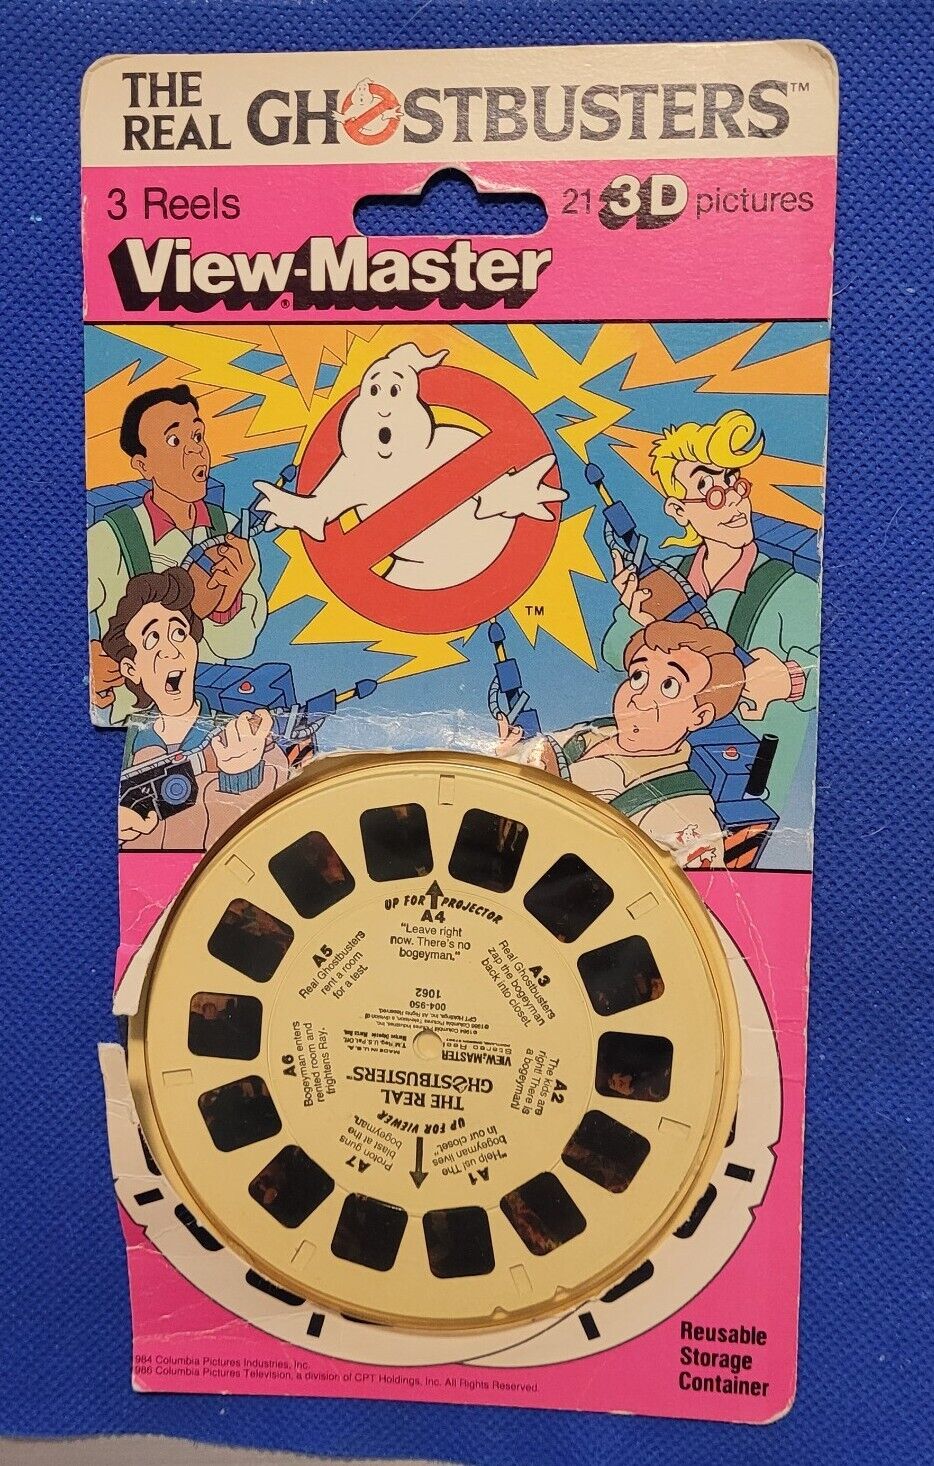 The Real Ghostbusters Cartoon TV Show view-master Reels 3 reel Blister Pack open